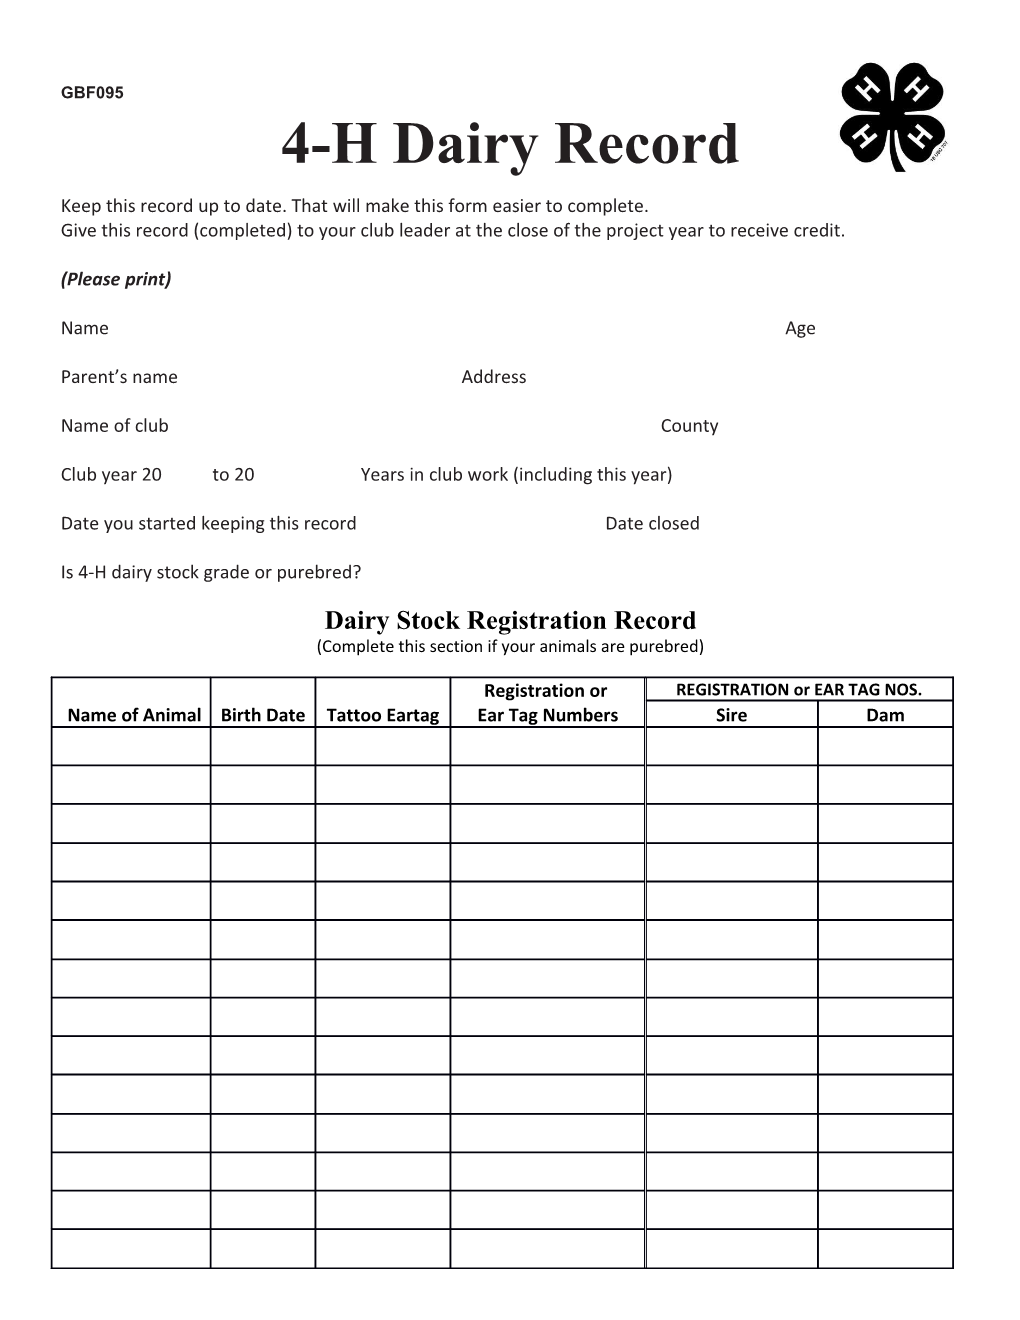 Keep This Record up to Date. That Will Make This Form Easier to Complete